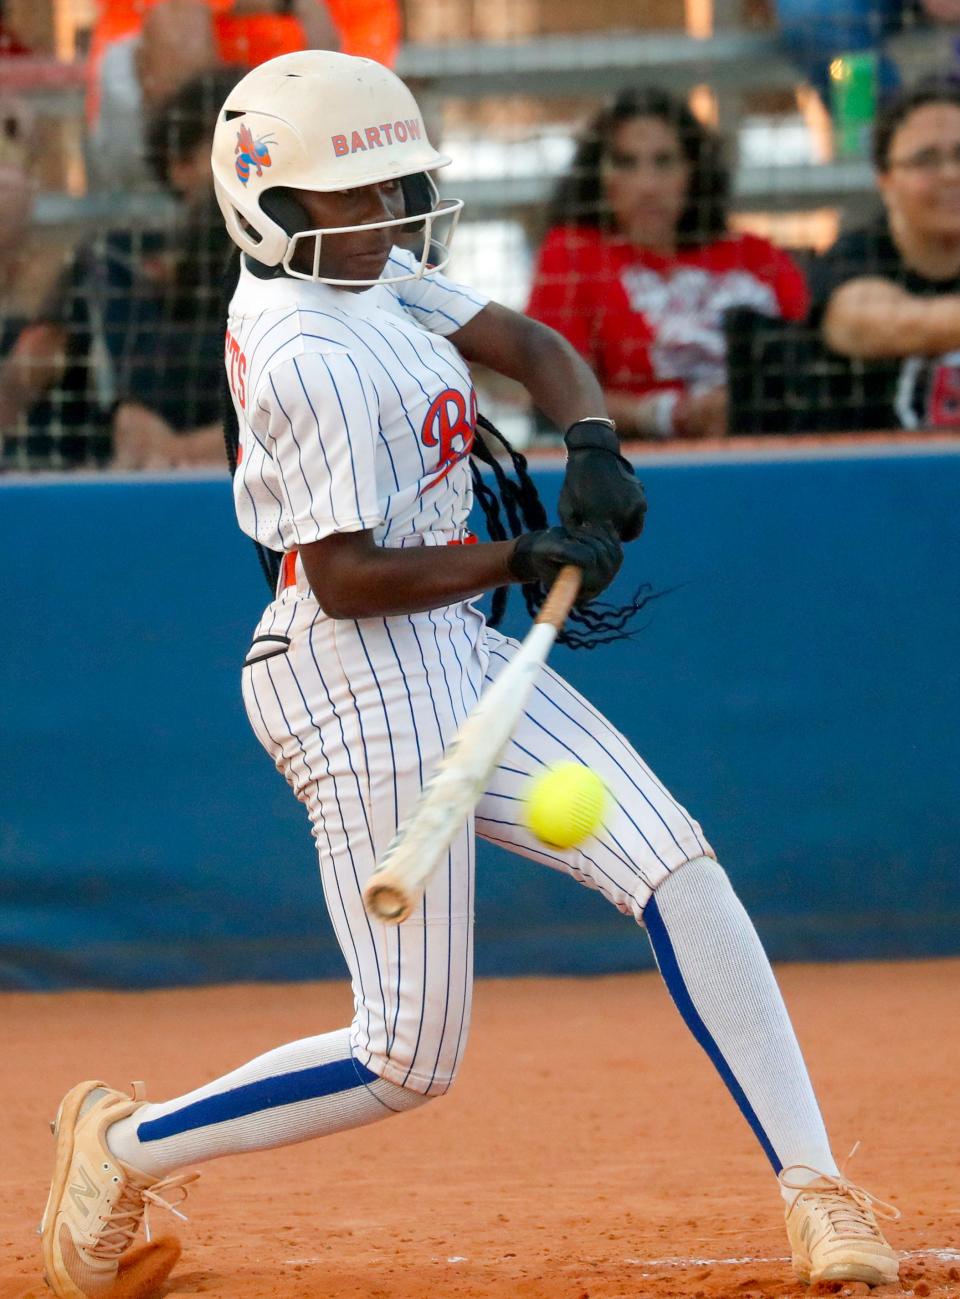 Bartow's Shay Narcisse bats against East River on Thursday in the Class 6A, Region 3 quarterfinals.